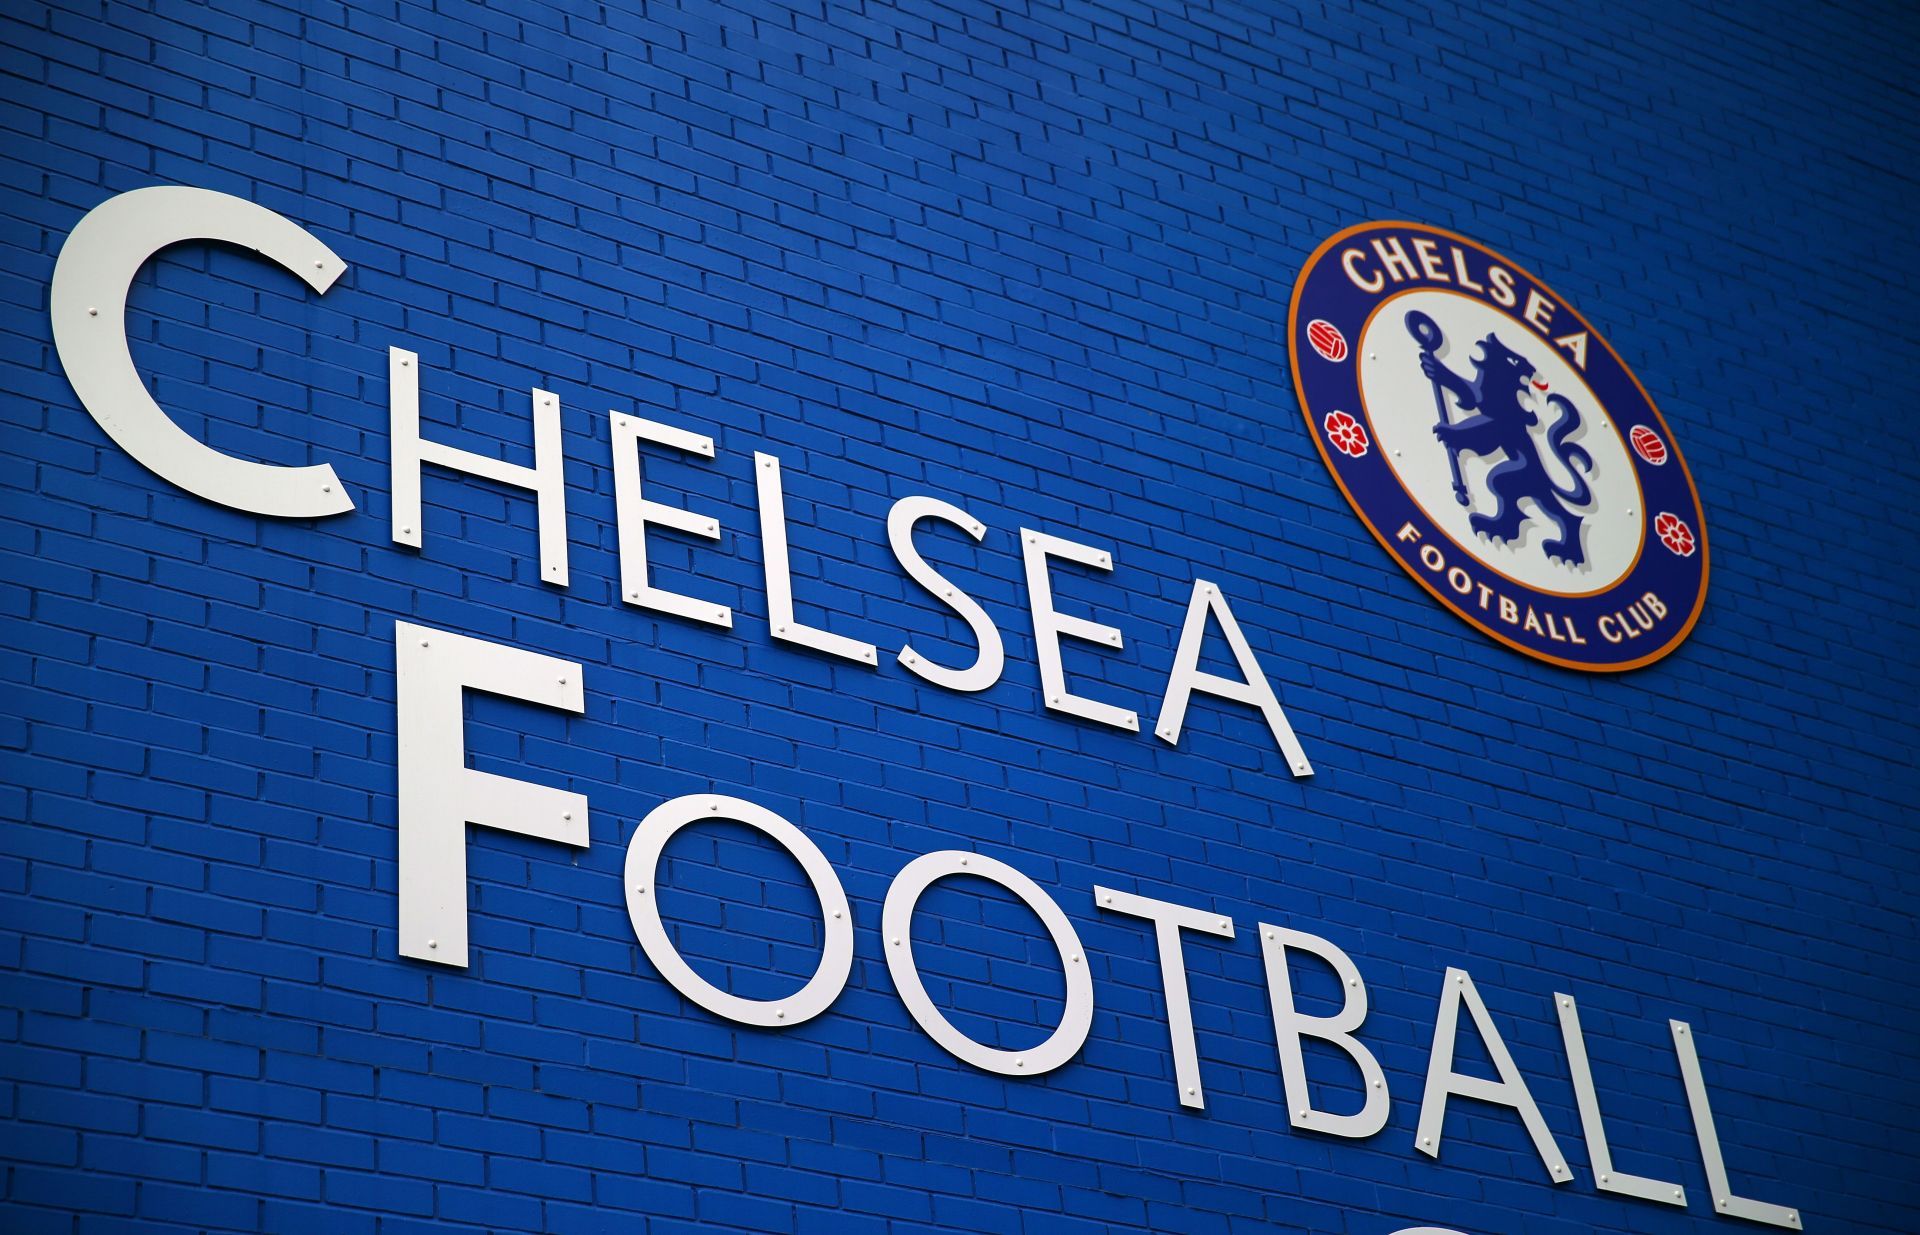 Chelsea is all set to get a new owner in the near future